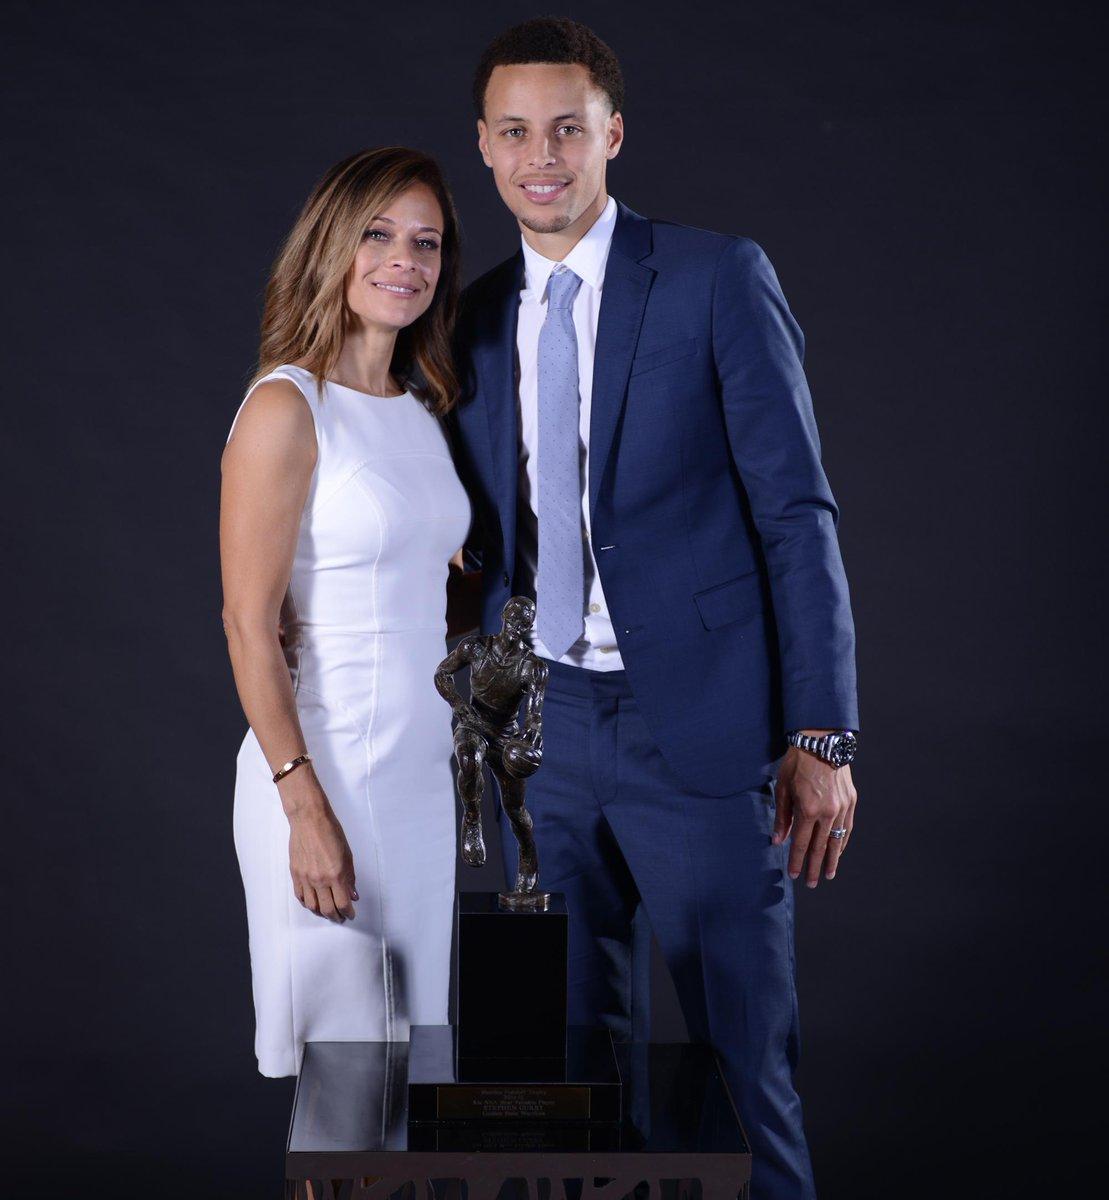 Sonya Curry with her son, Stephen Curry, for his Most Valuable Player Award